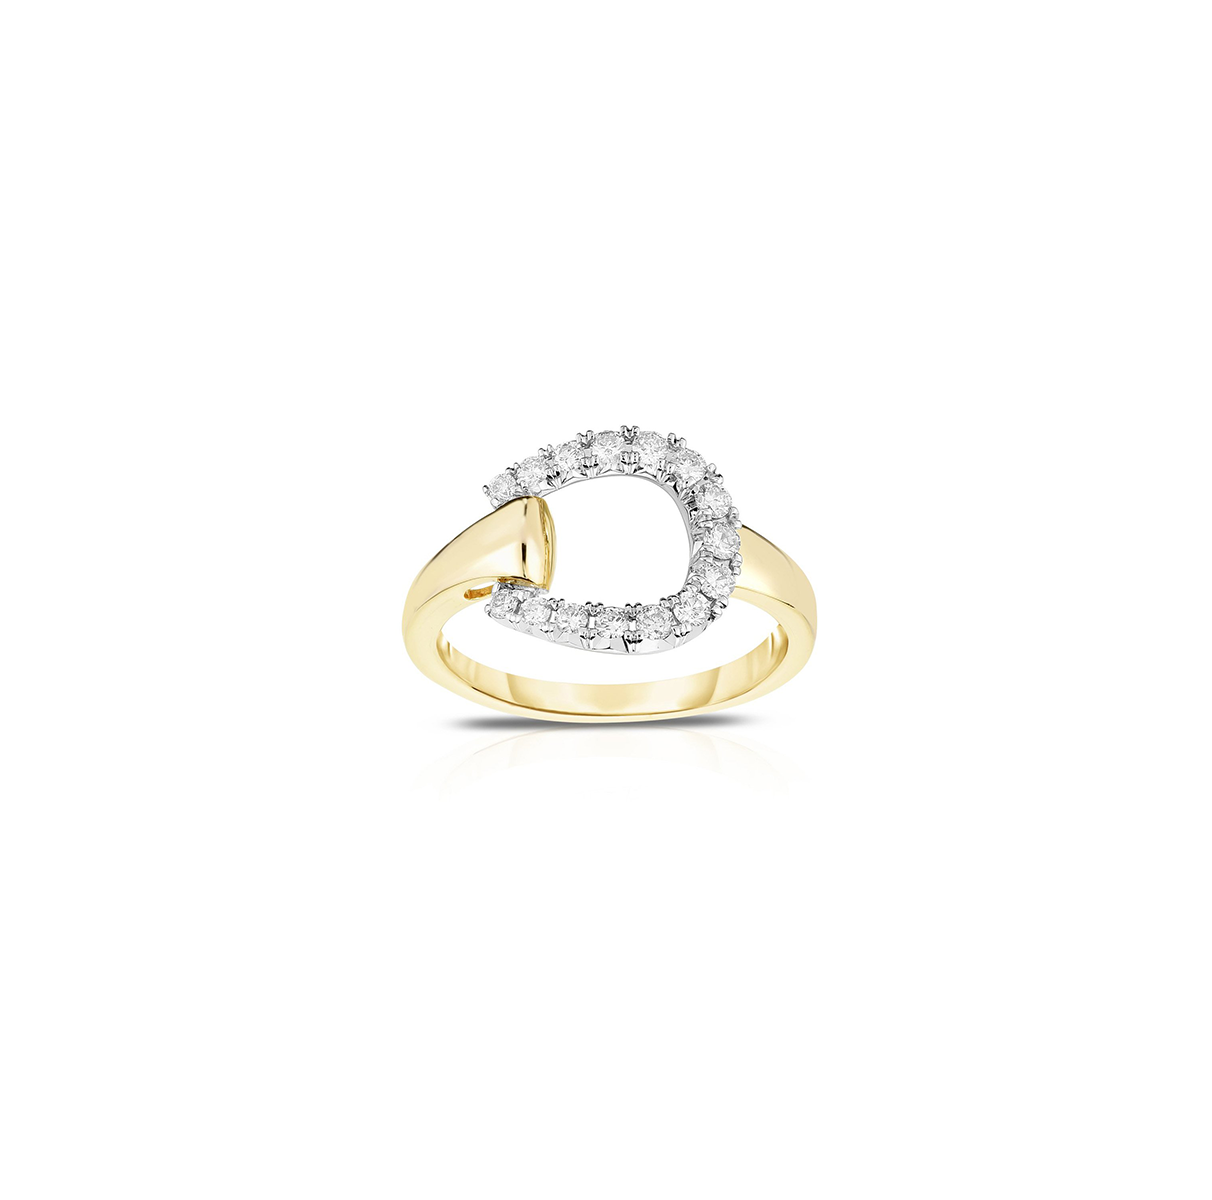 Sabel Collection 14K Yellow Gold and White Diamond Horseshoe Ring